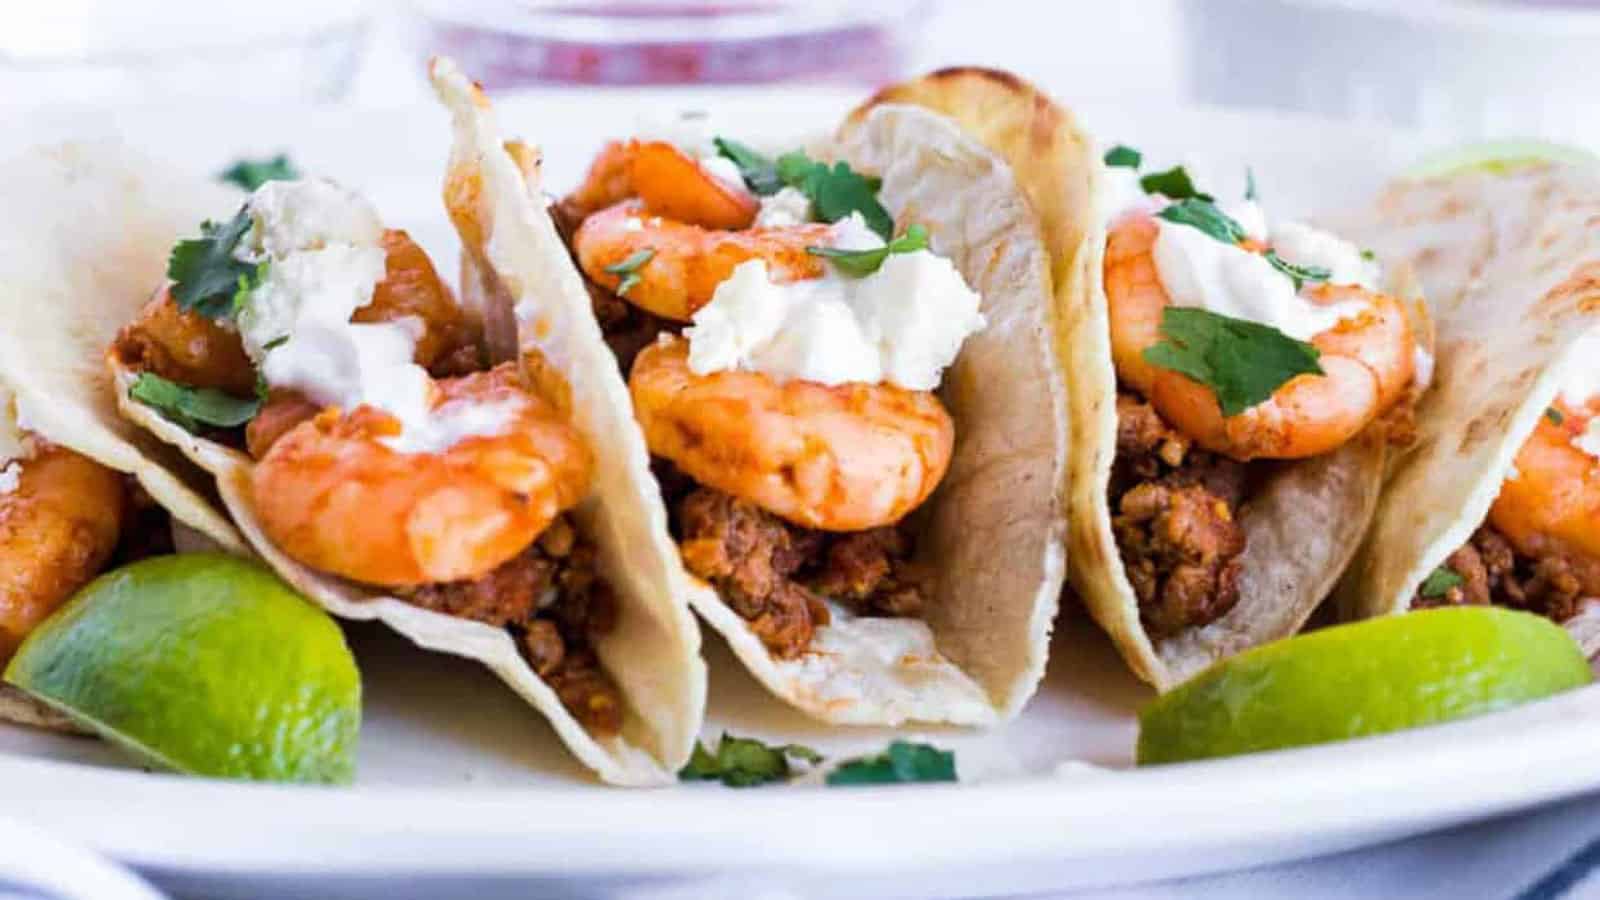 <p>Add a Spanish touch to your seafood adventure with Shrimp and Chorizo Tacos. Filled with robust flavors, these are perfect for that backyard barbecue or a casual dinner with friends. So, bring home these seaside joys and make every meal unique.<br><strong>Get the Recipe: </strong><a href="https://allwaysdelicious.com/shrimp-and-chorizo-tacos/?utm_source=msn&utm_medium=page&utm_campaign=msn">Shrimp and Chorizo Tacos</a></p>